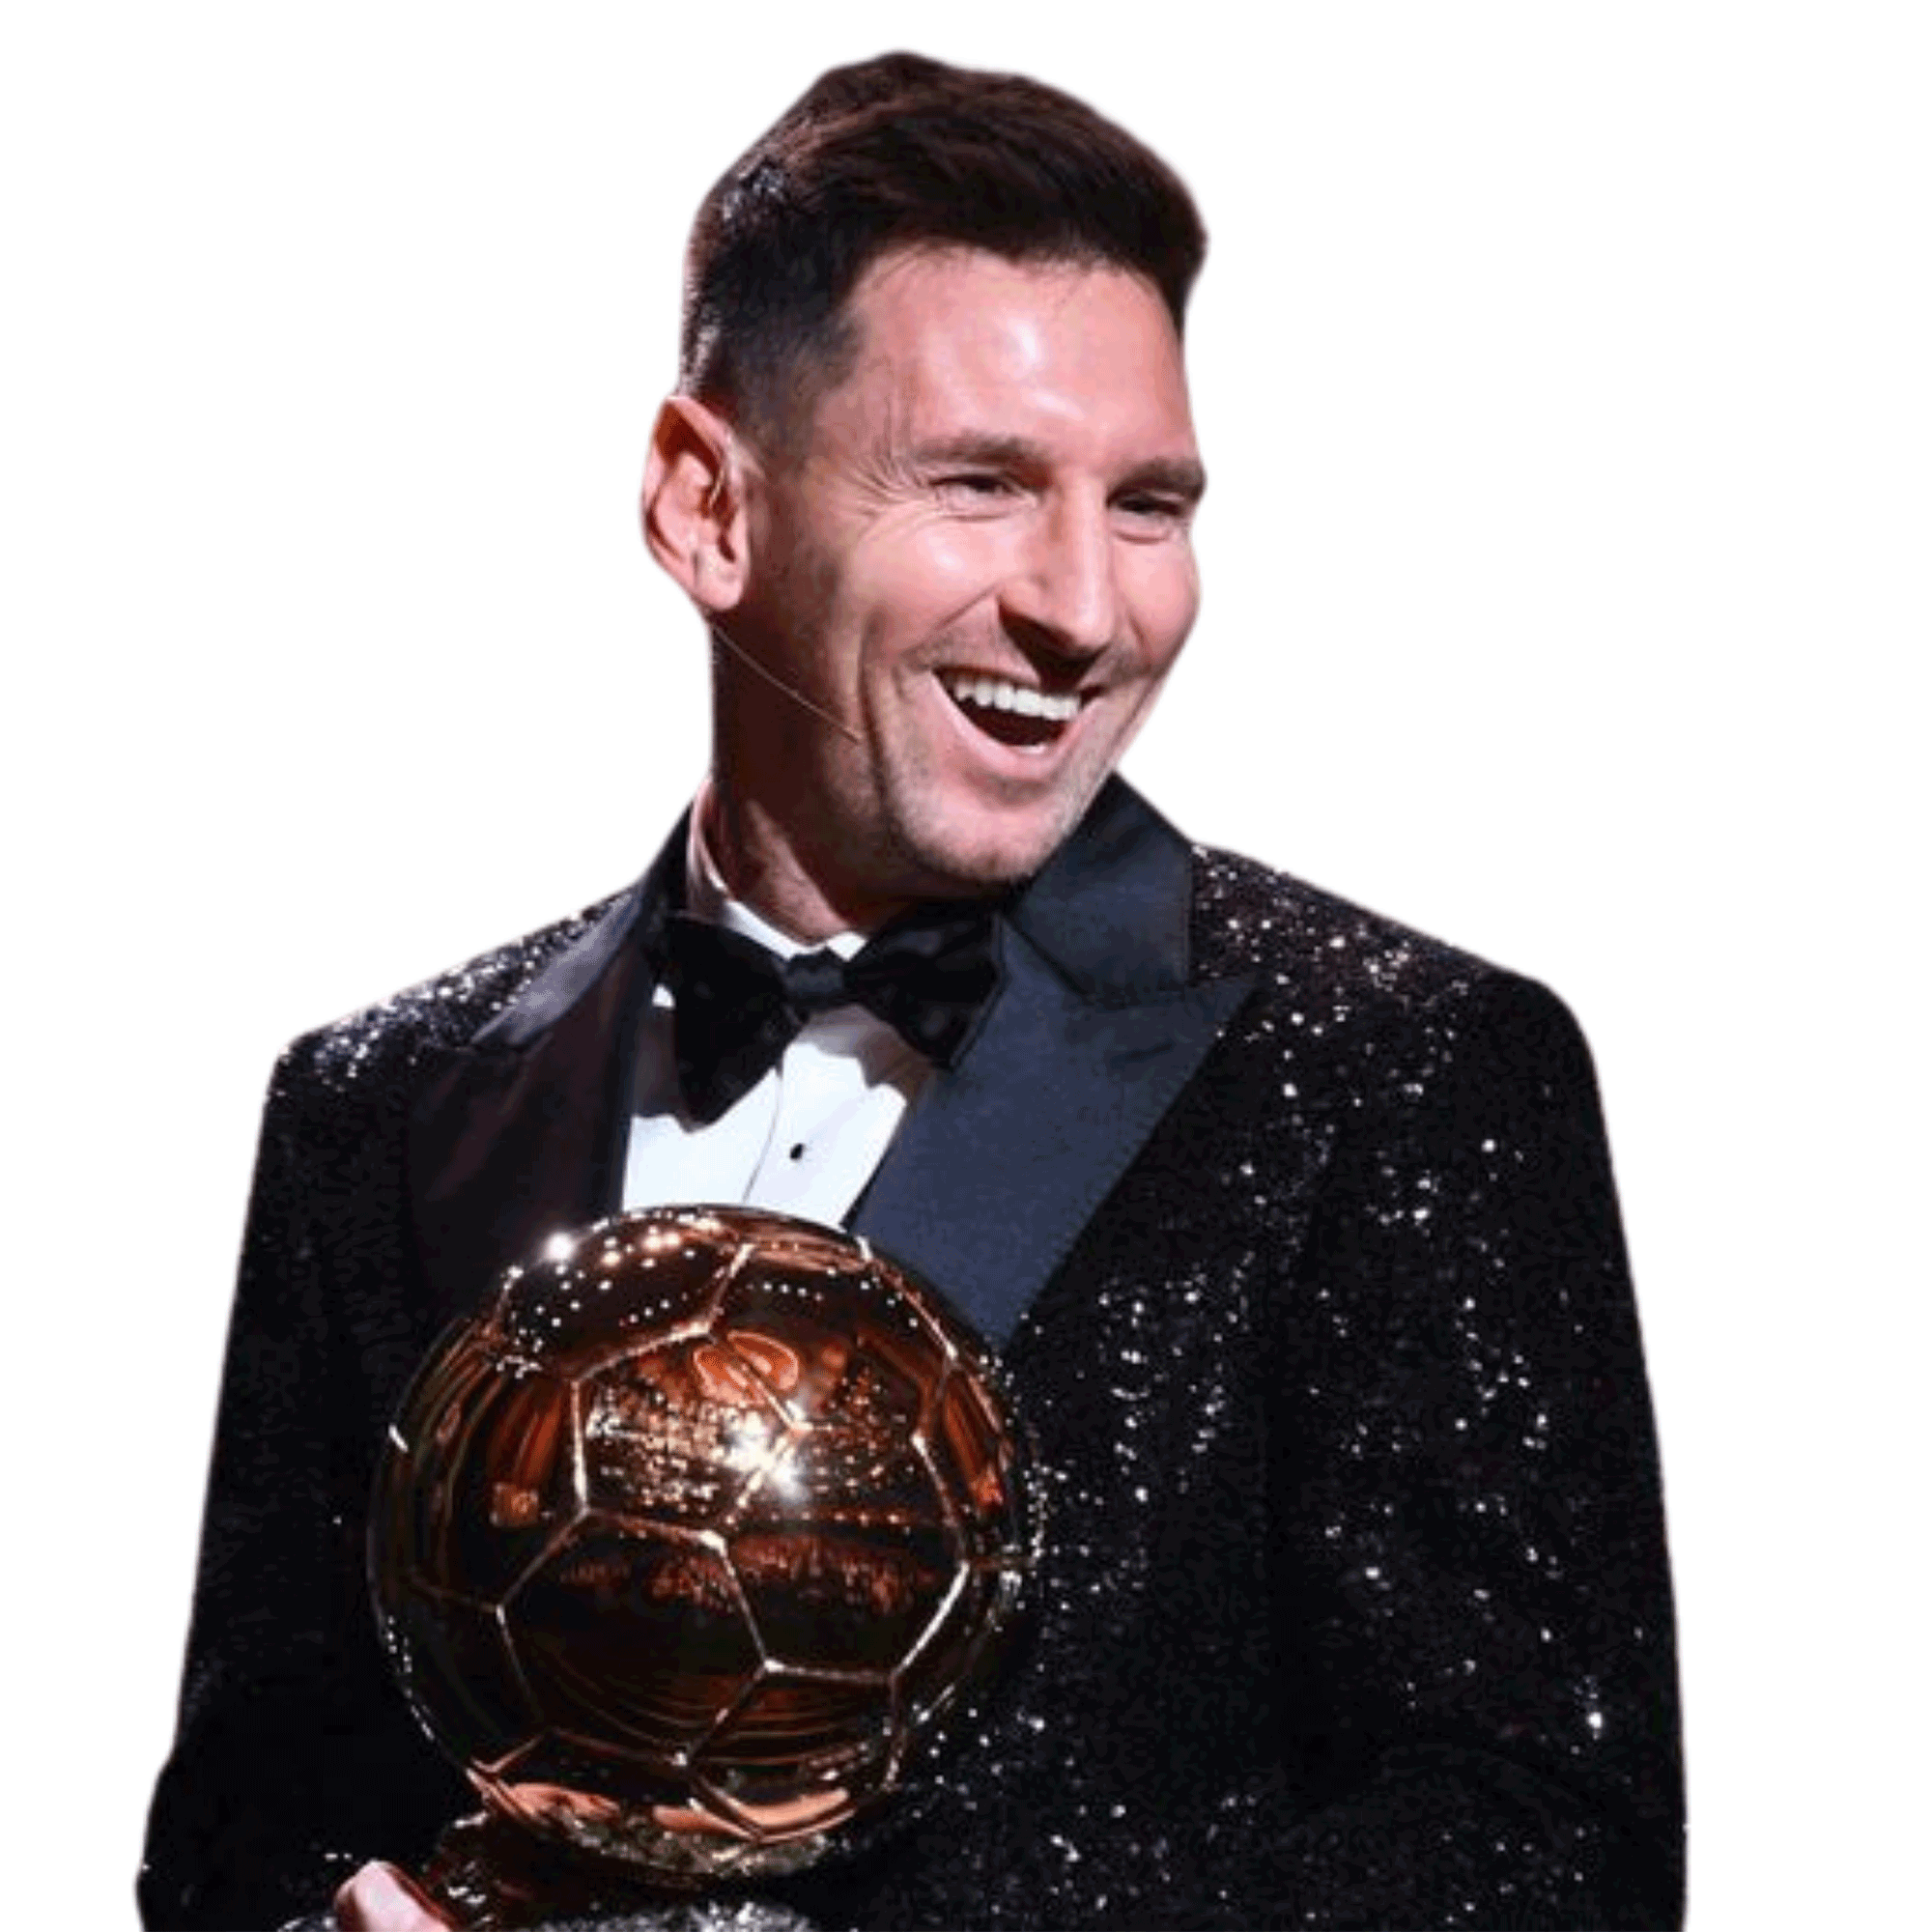 Lionel Messi Laughing Sticker by NEVITALY for iOS & Android | GIPHY